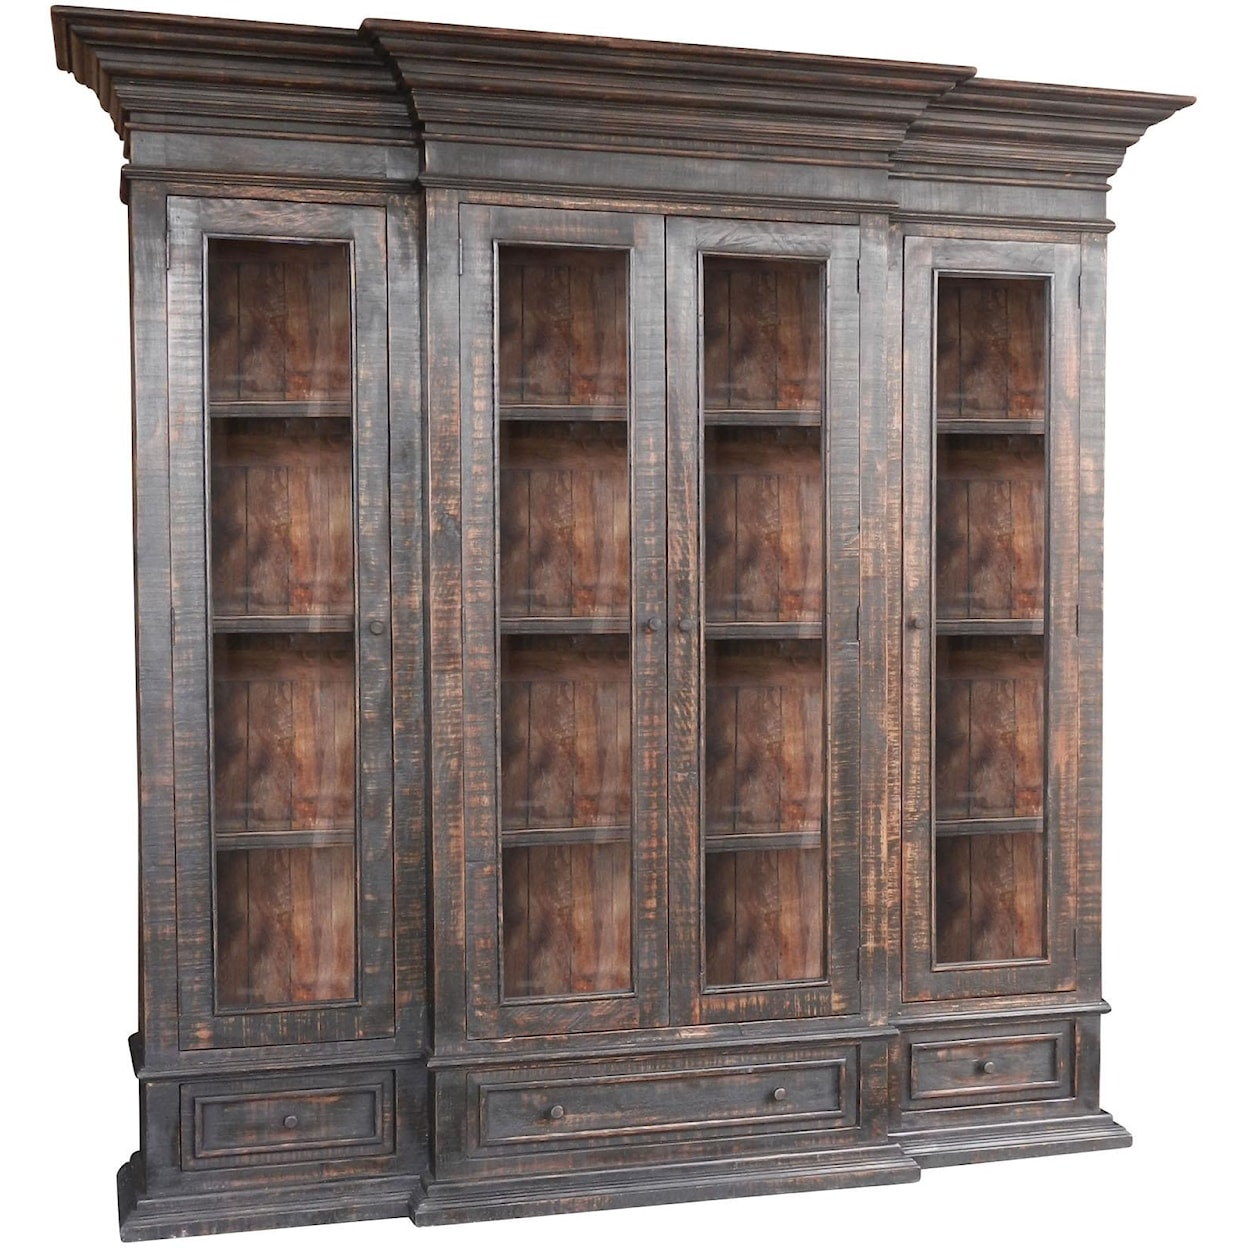 Furniture Source International Bookcases  Laughton Display Cabinet